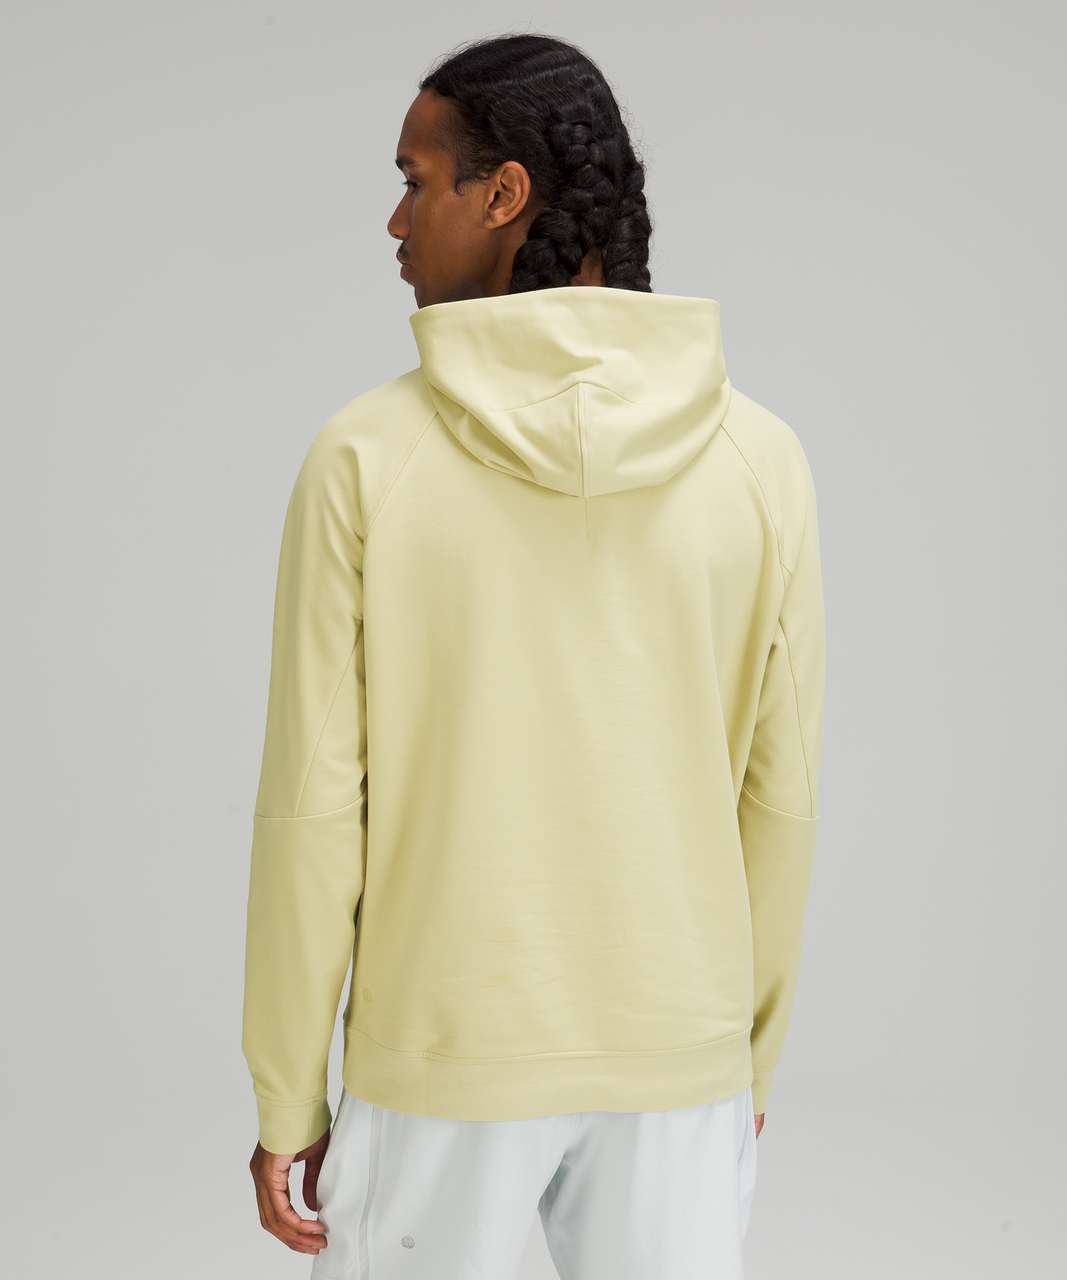 Lululemon City Sweat Pullover Hoodie French Terry - Dew Green